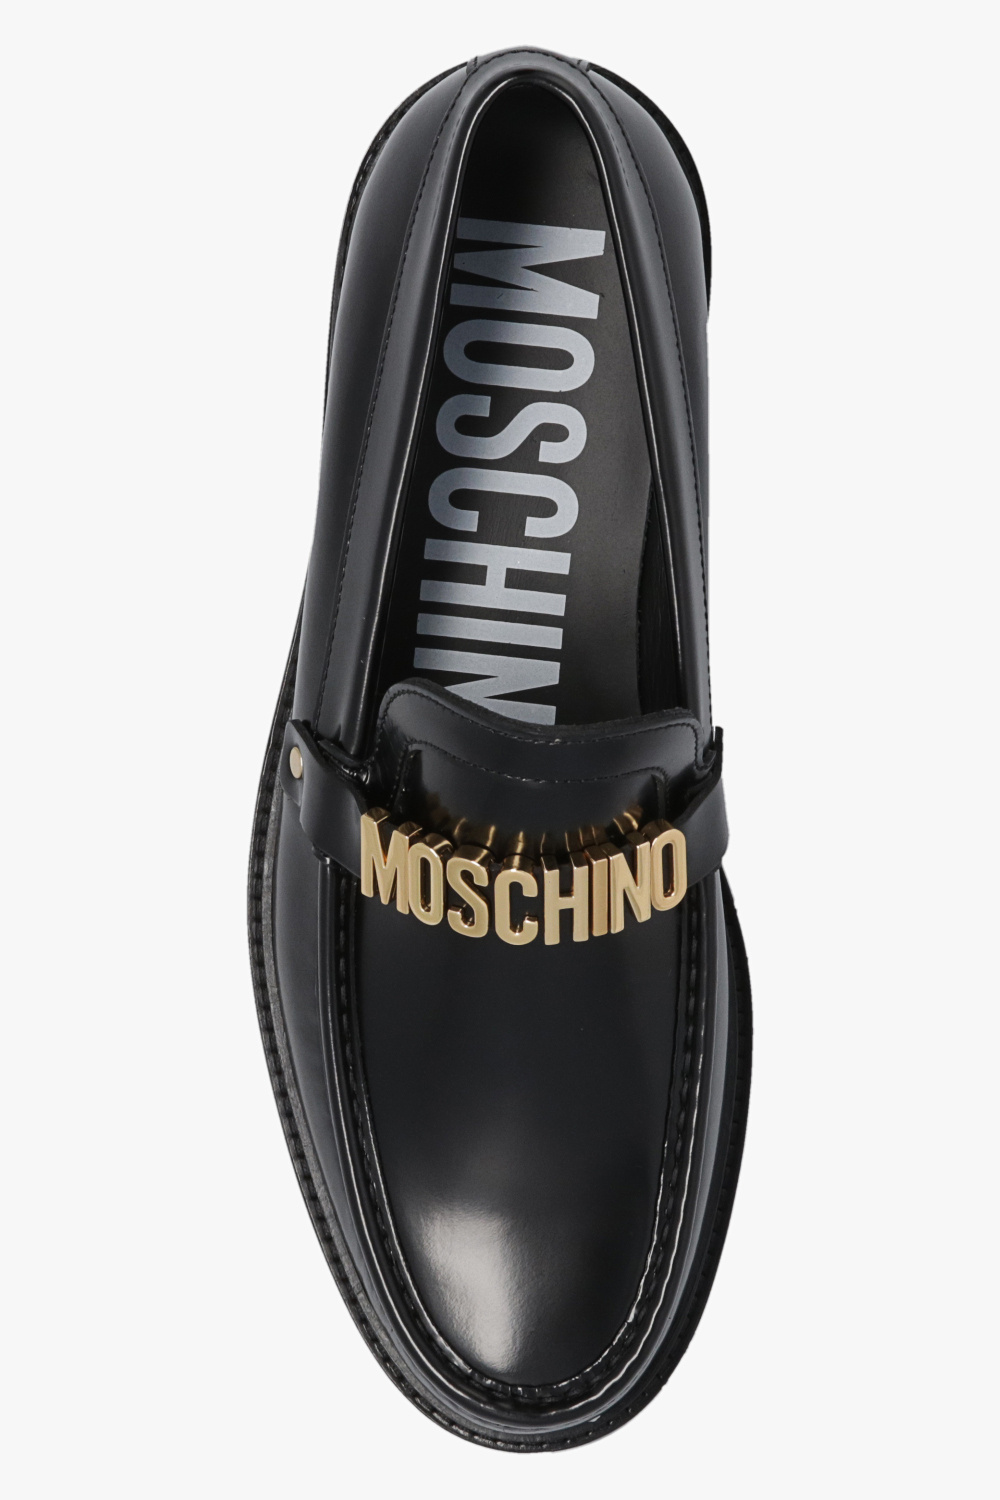 Moschino Leather loafers | Men's Shoes | Vitkac